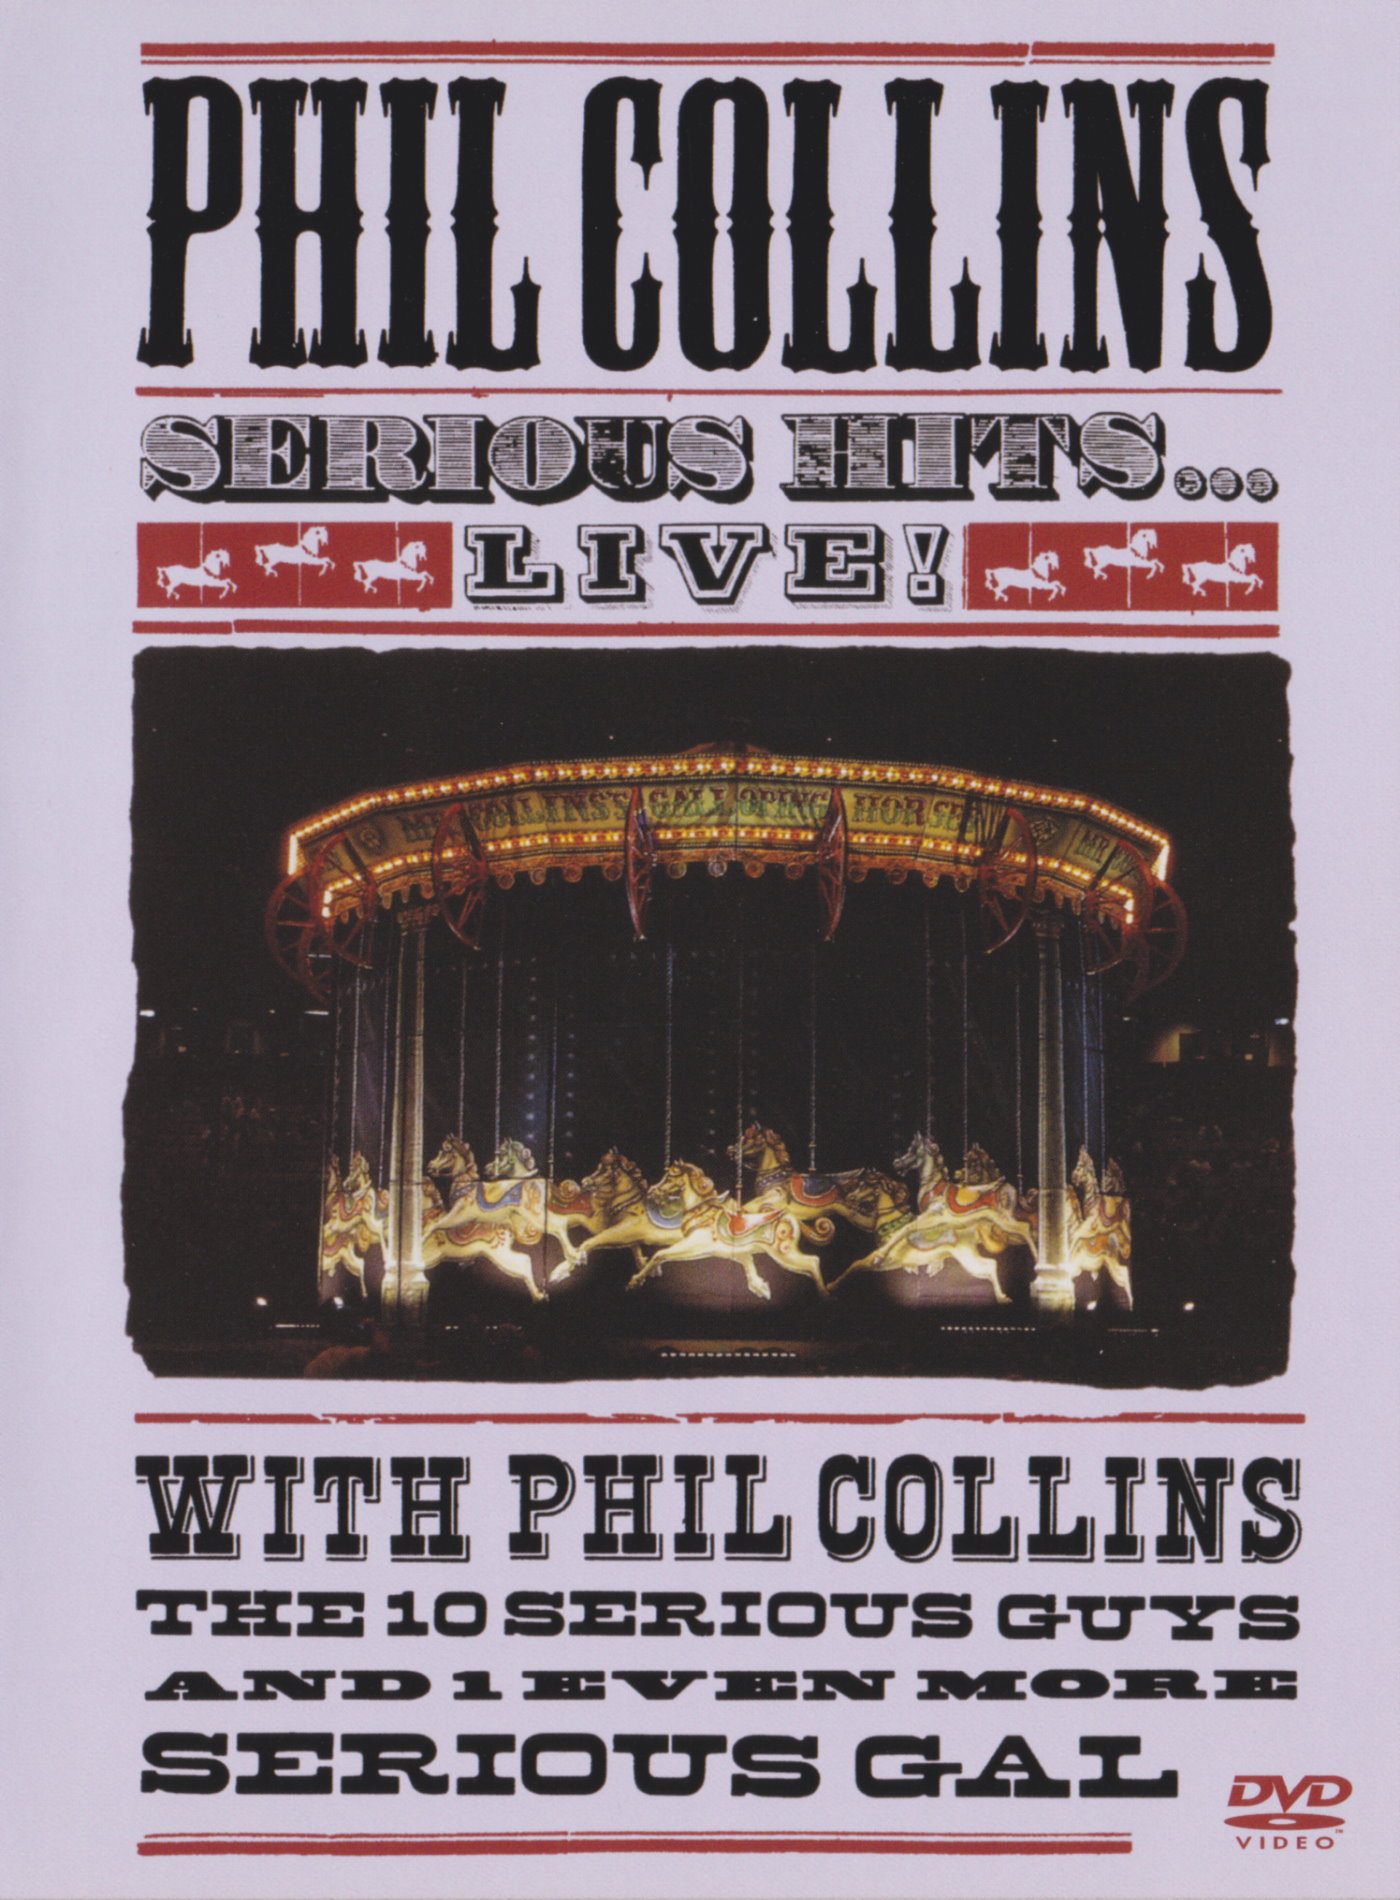 Cover - Phil Collins - Serious Hits… Live.jpg